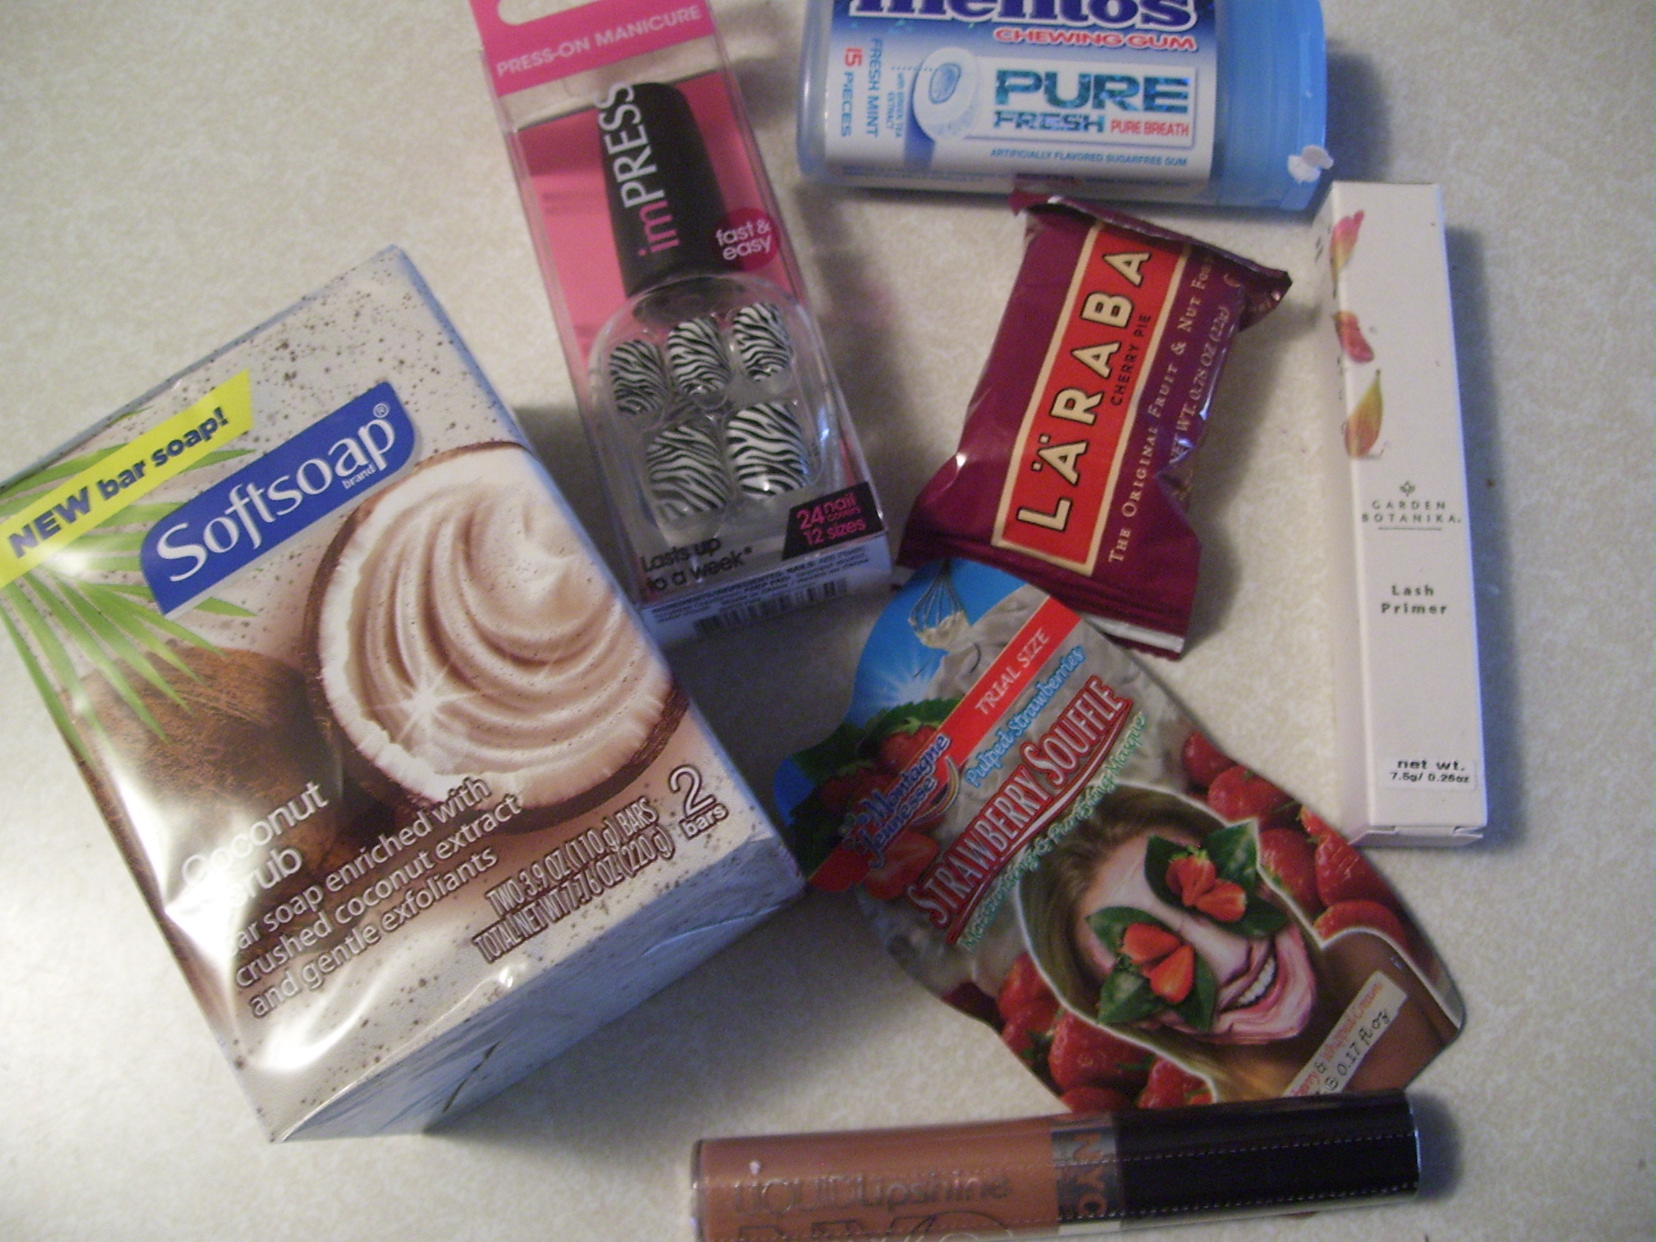 Take a Peek at the Holiday 2011 VoxBox from Influenster!